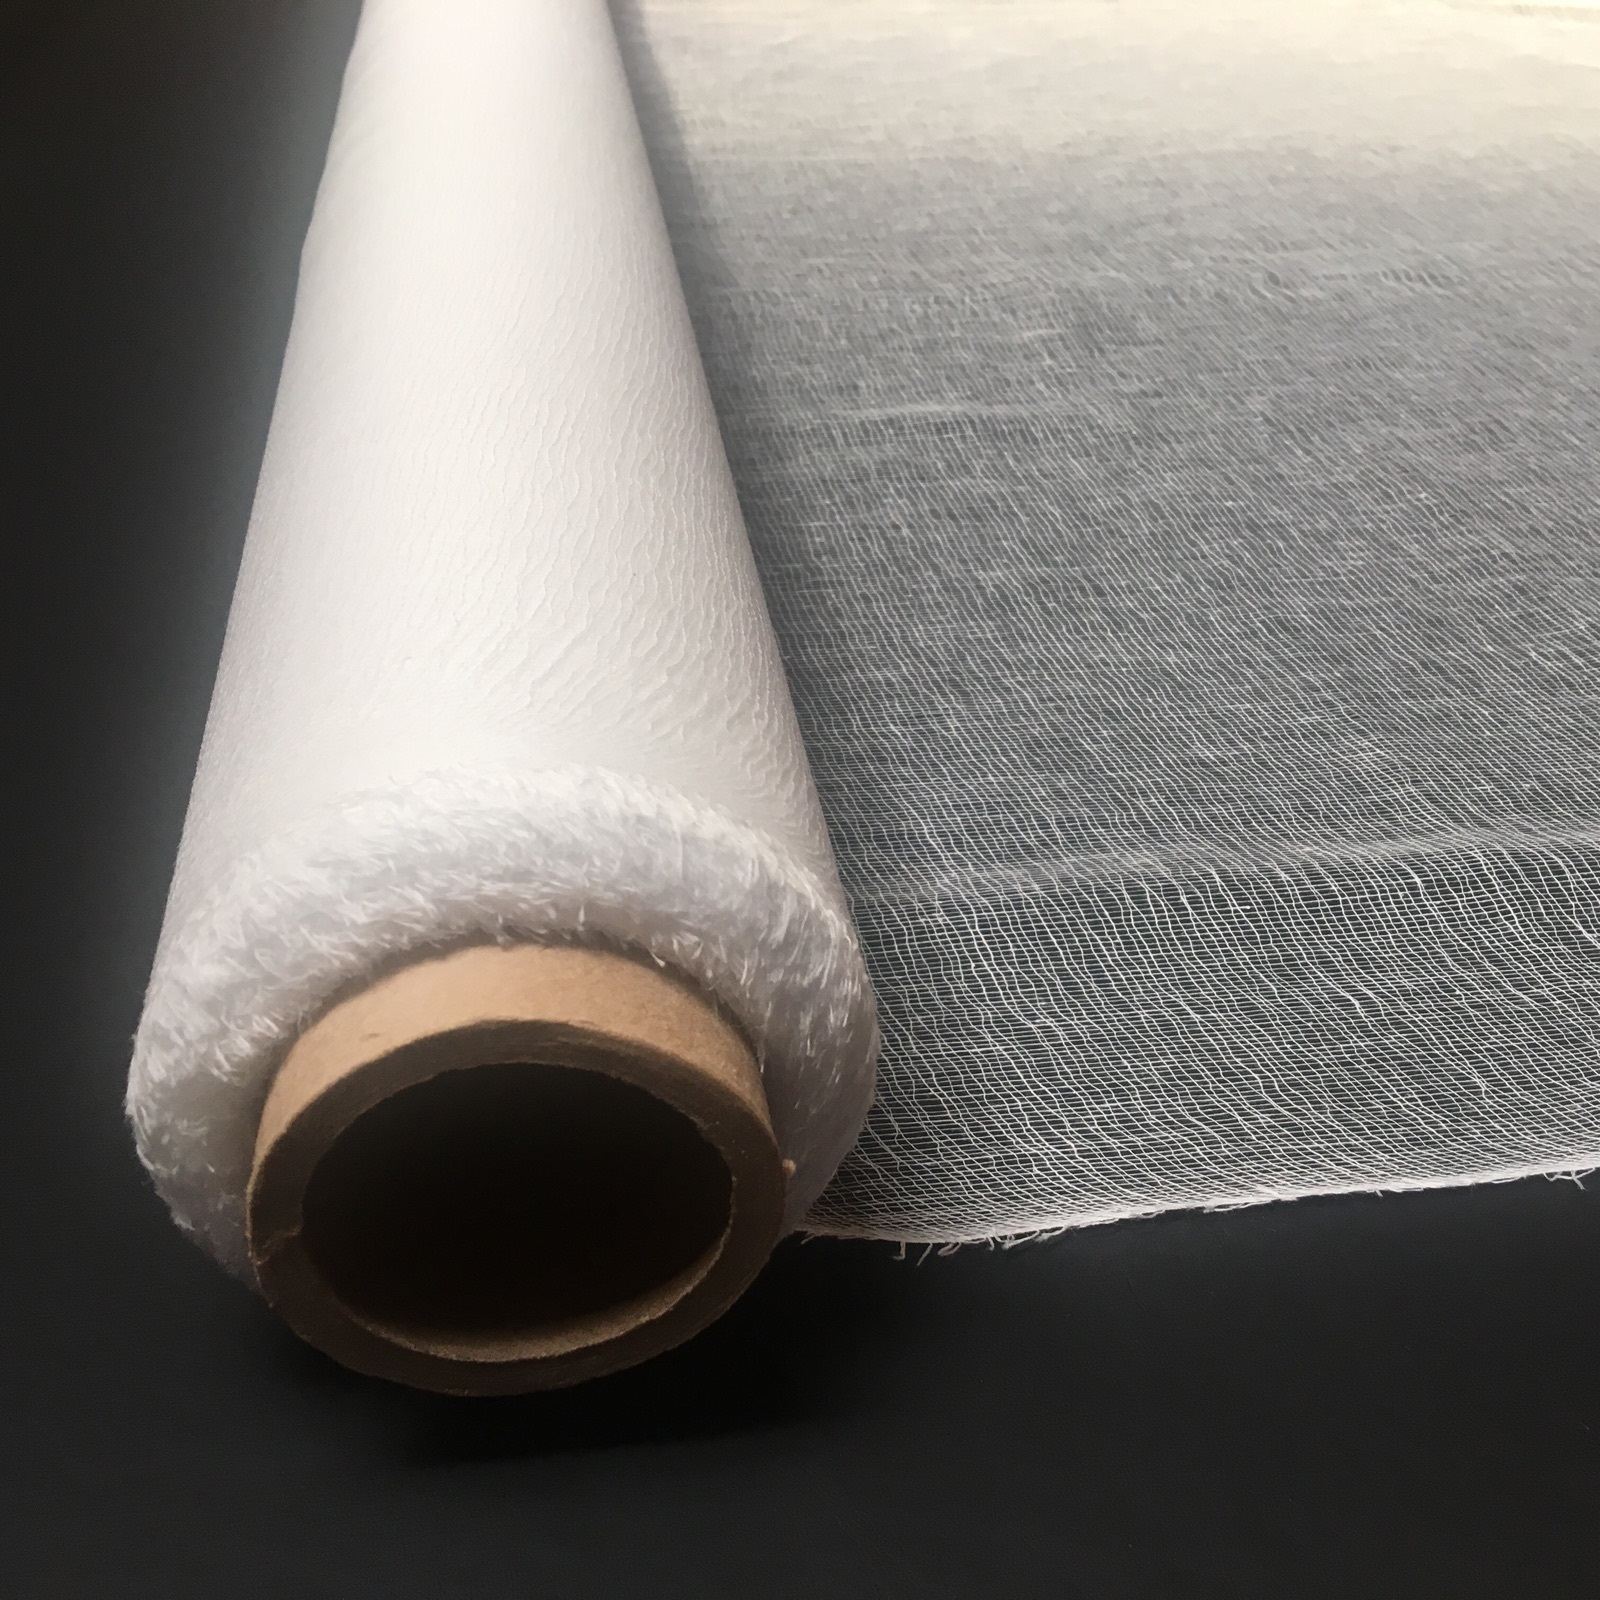 Grade 10 Bleached Cheesecloth - 100 Yard Roll 36" Wide